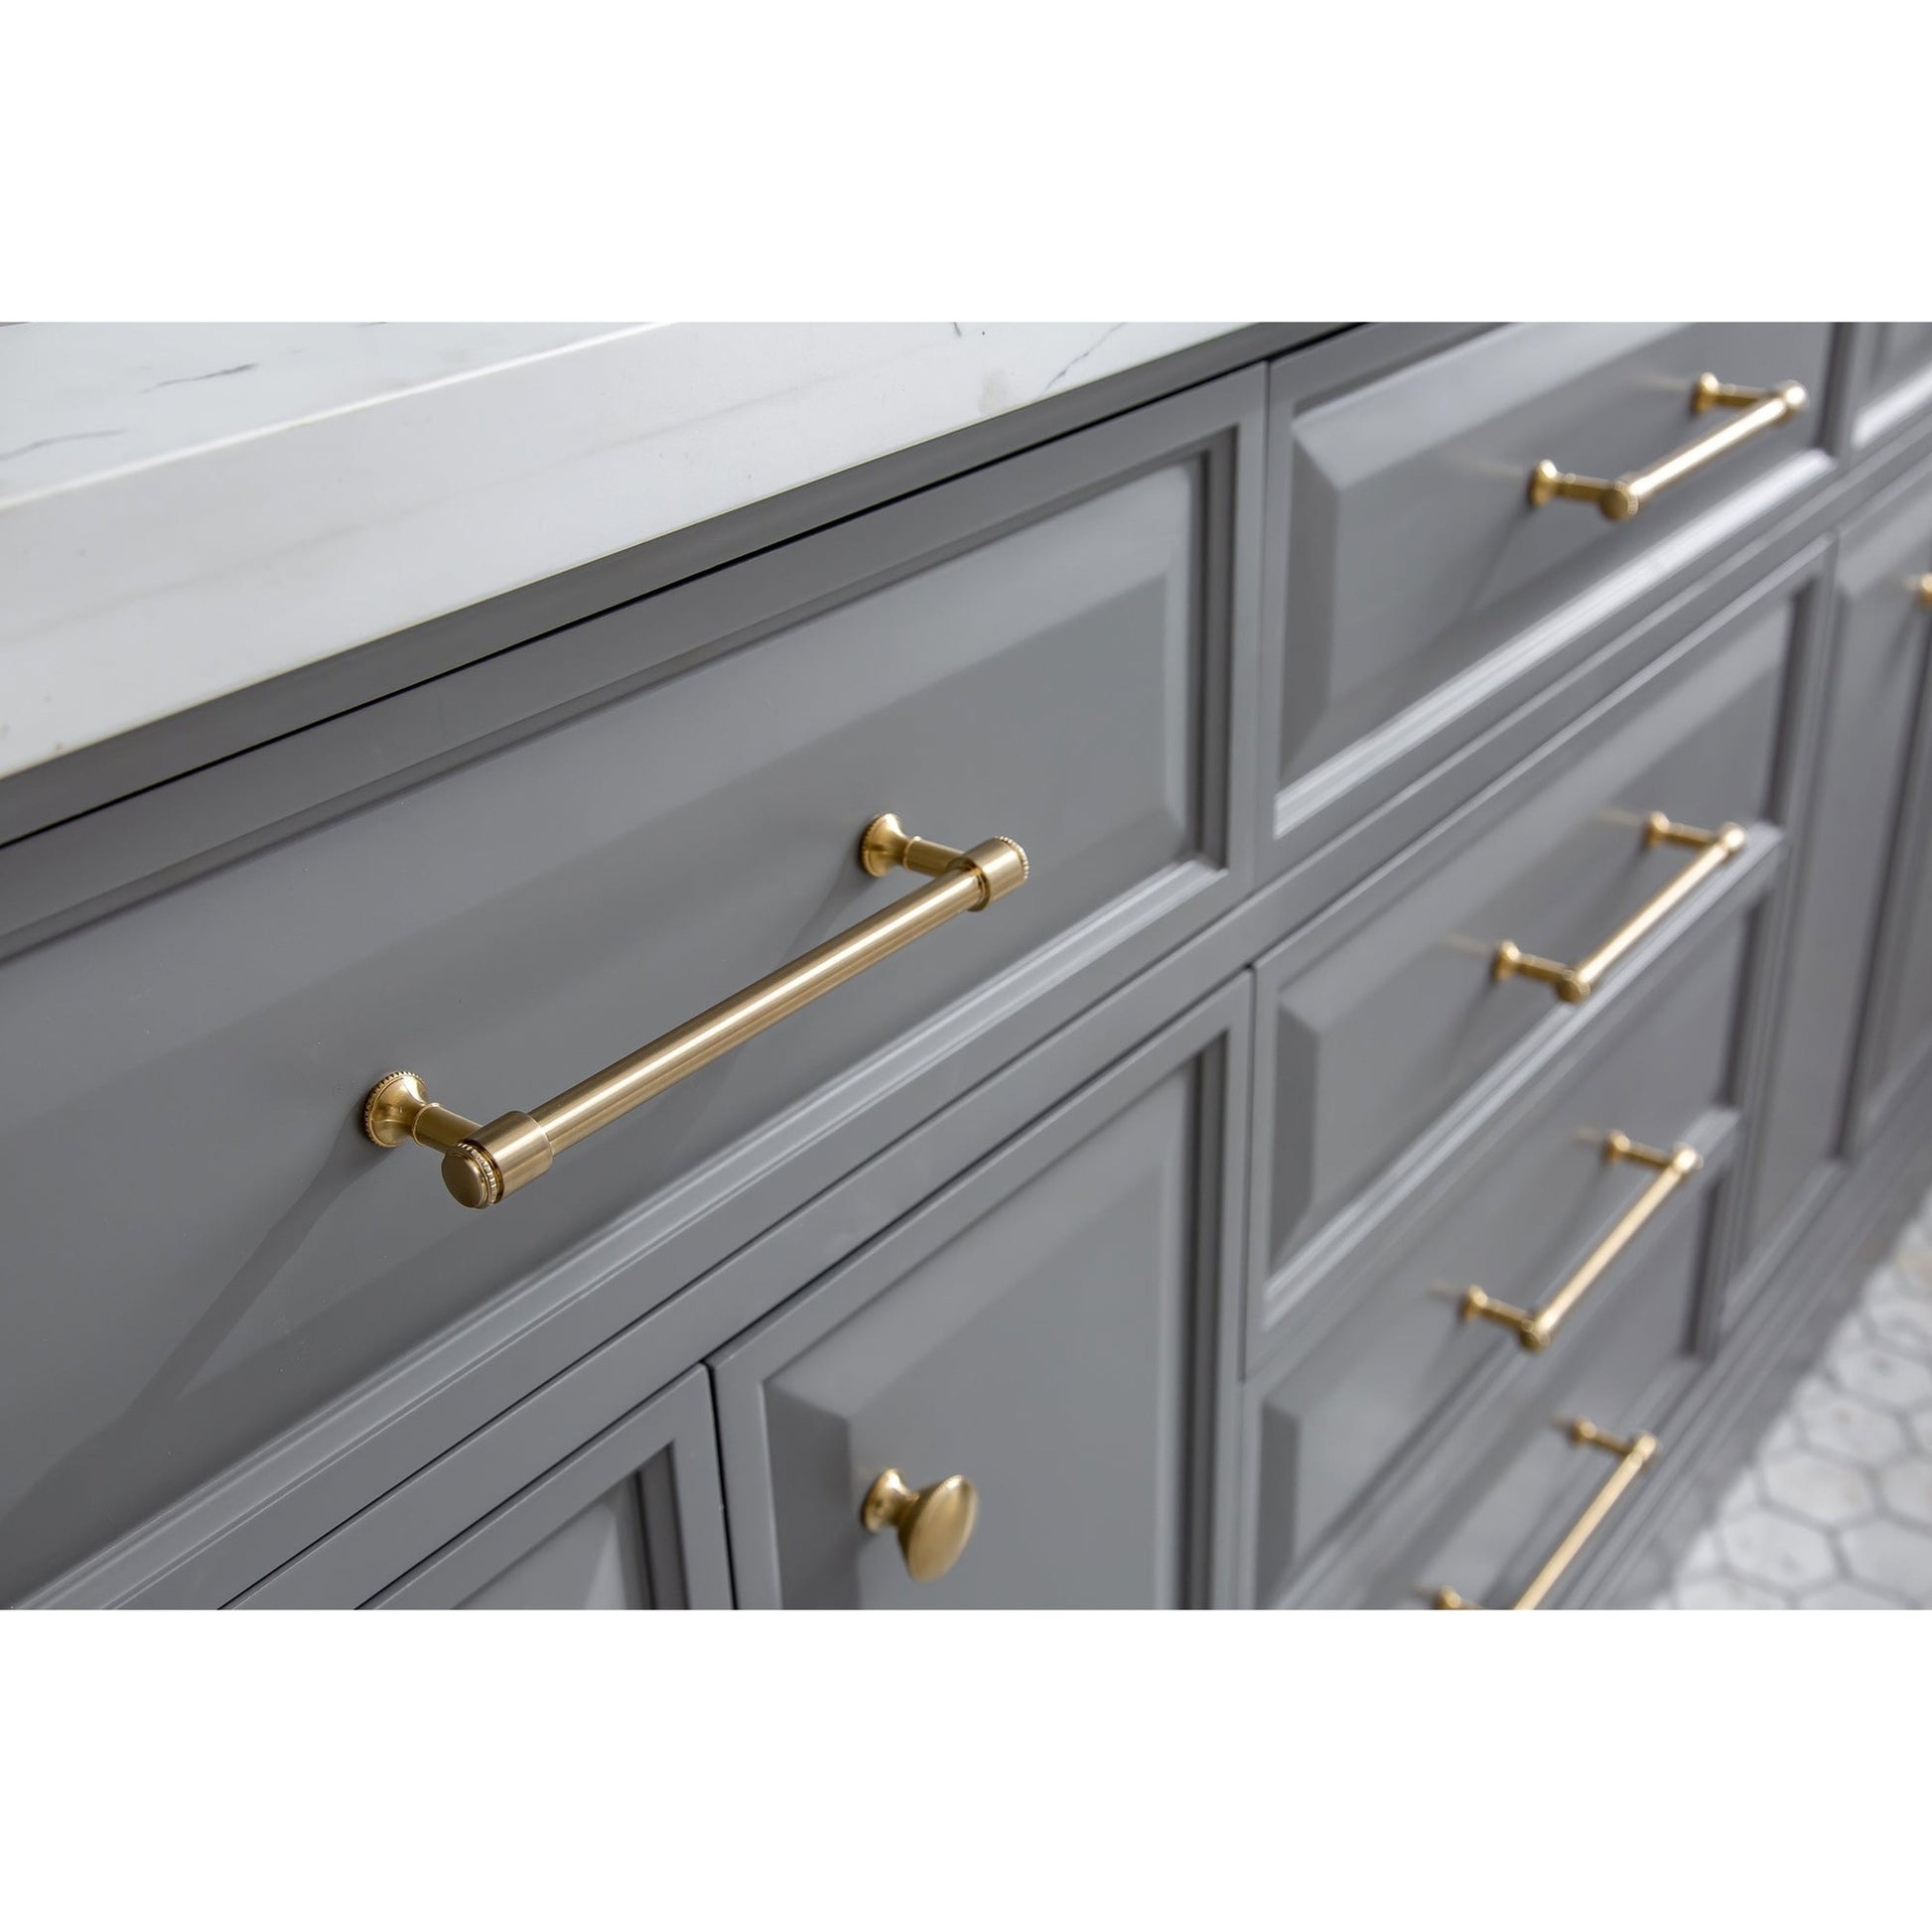 Water Creation Palace 72" Quartz Carrara Cashmere Grey Bathroom Vanity Set With Hardware And F2-0013 Faucets in Satin Gold Finish And Only Mirrors in Chrome Finish